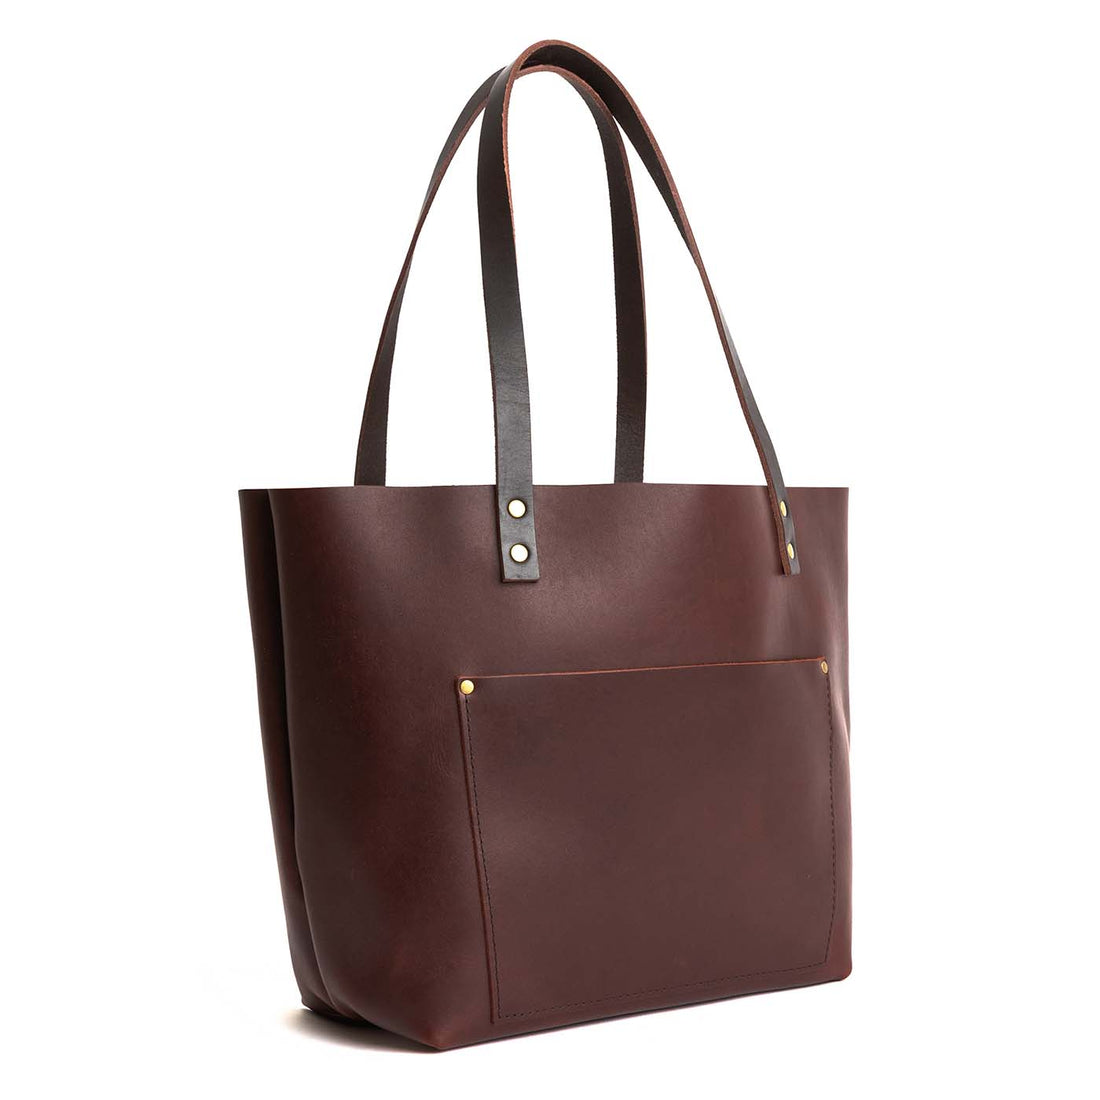 'Almost Perfect' Leather Tote Bag | Portland Leather Goods